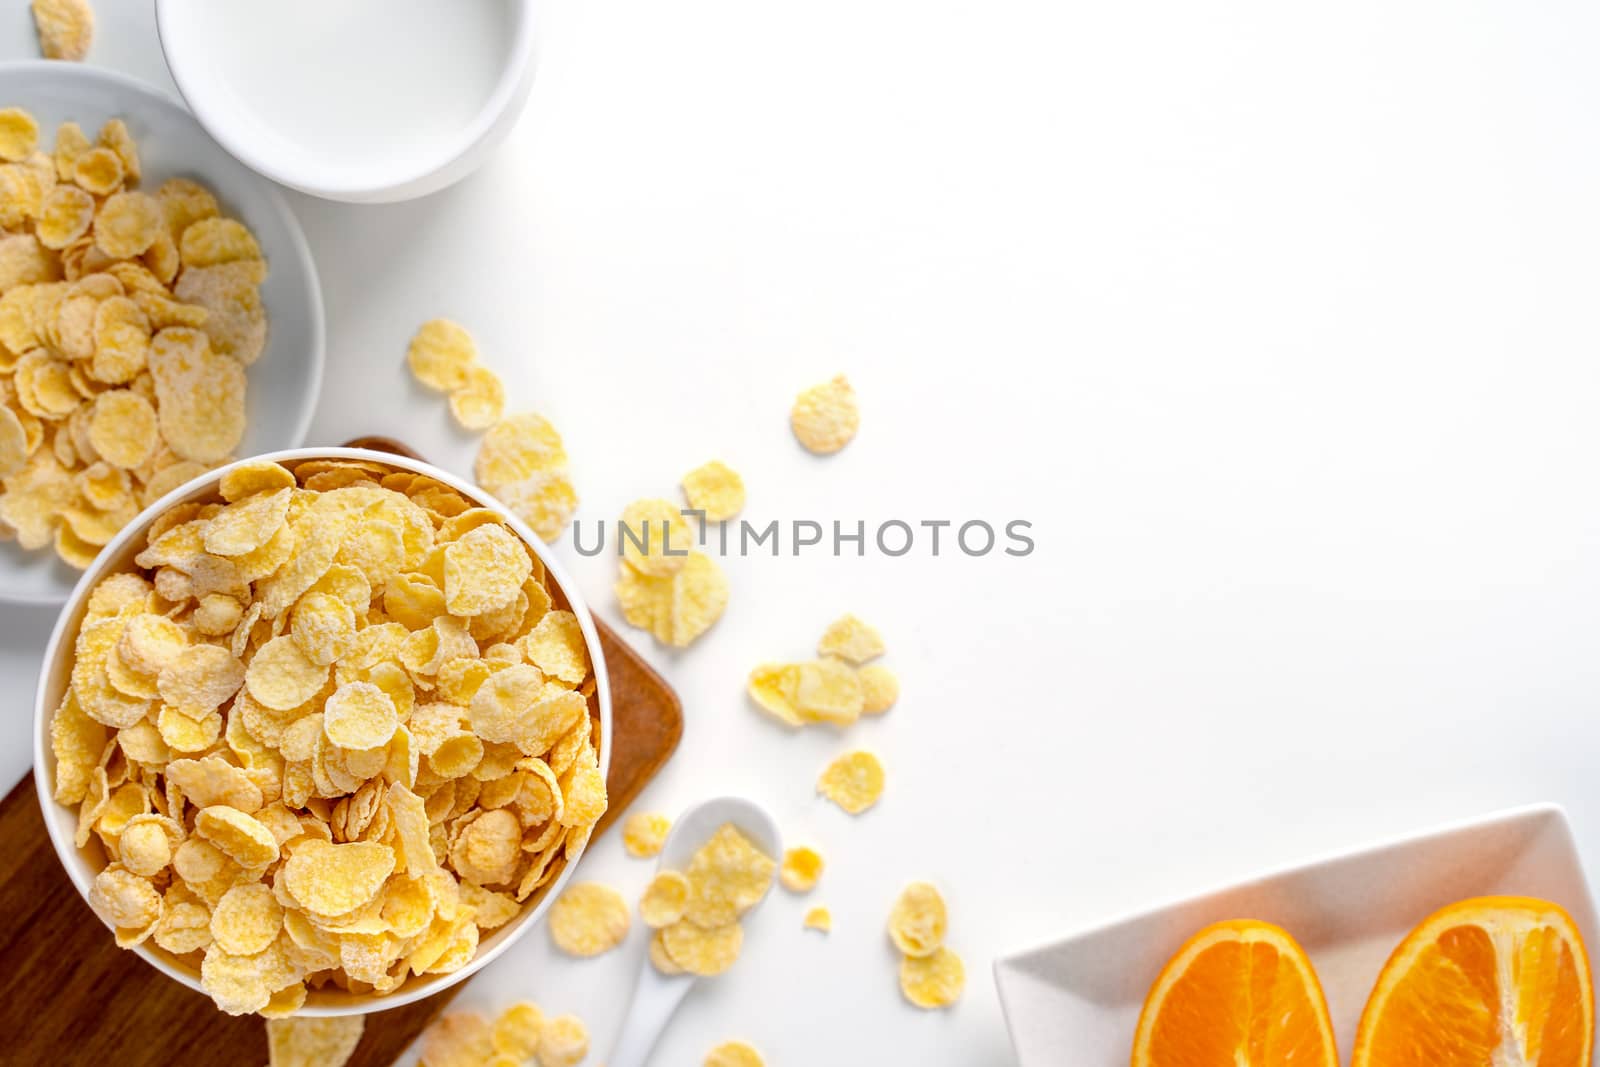 Corn flakes bowl sweeties with milk and orange on white background, top view, flat lay overhead layout, fresh and healthy breakfast design concept.